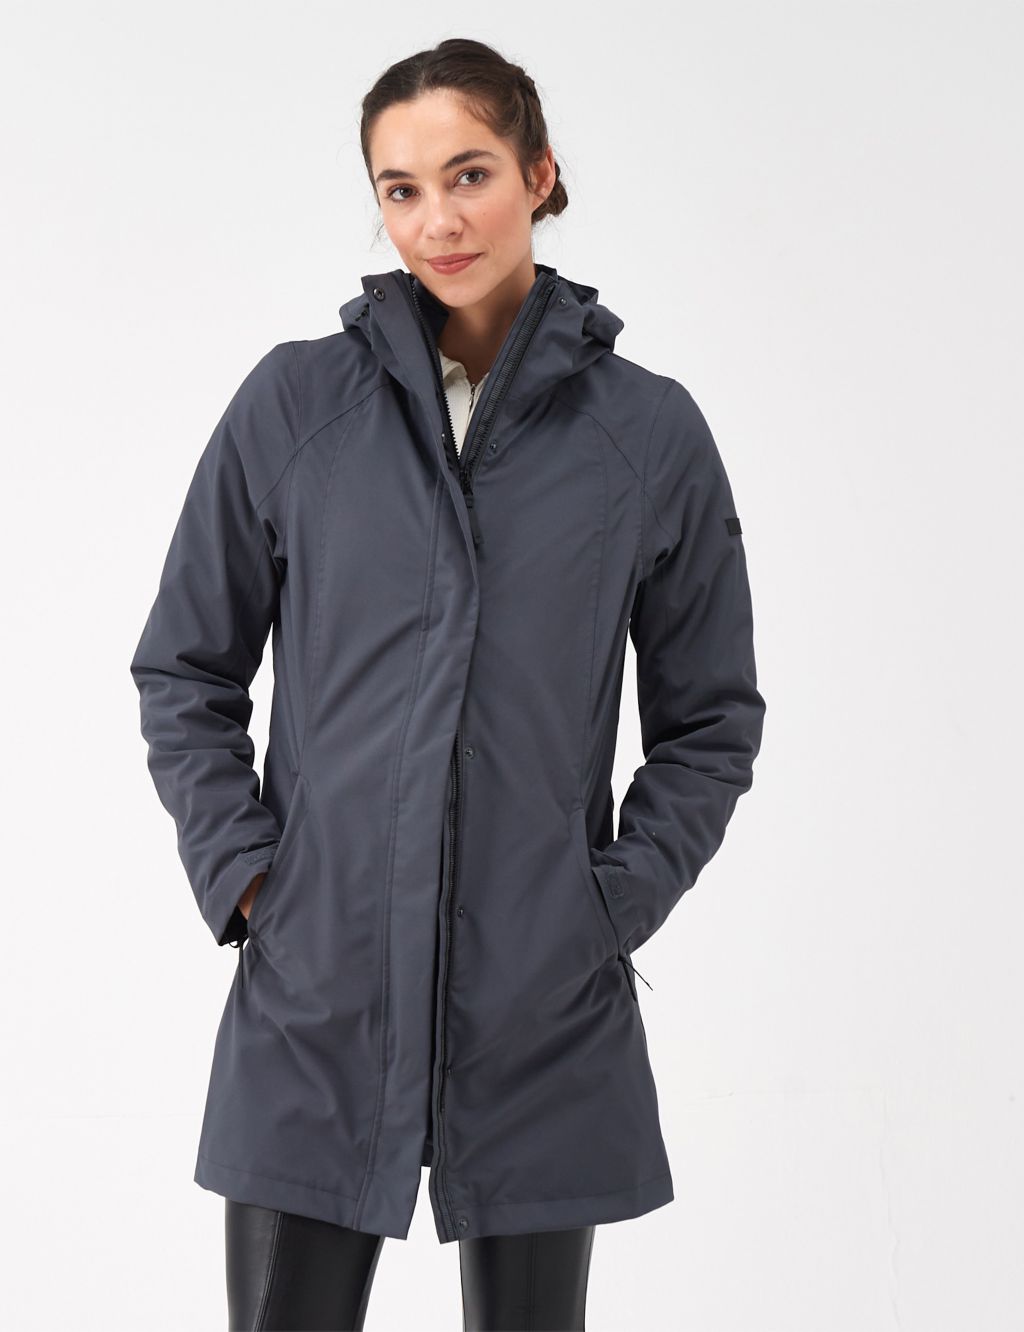 Page 6 - Women’s Coats & Jackets | M&S